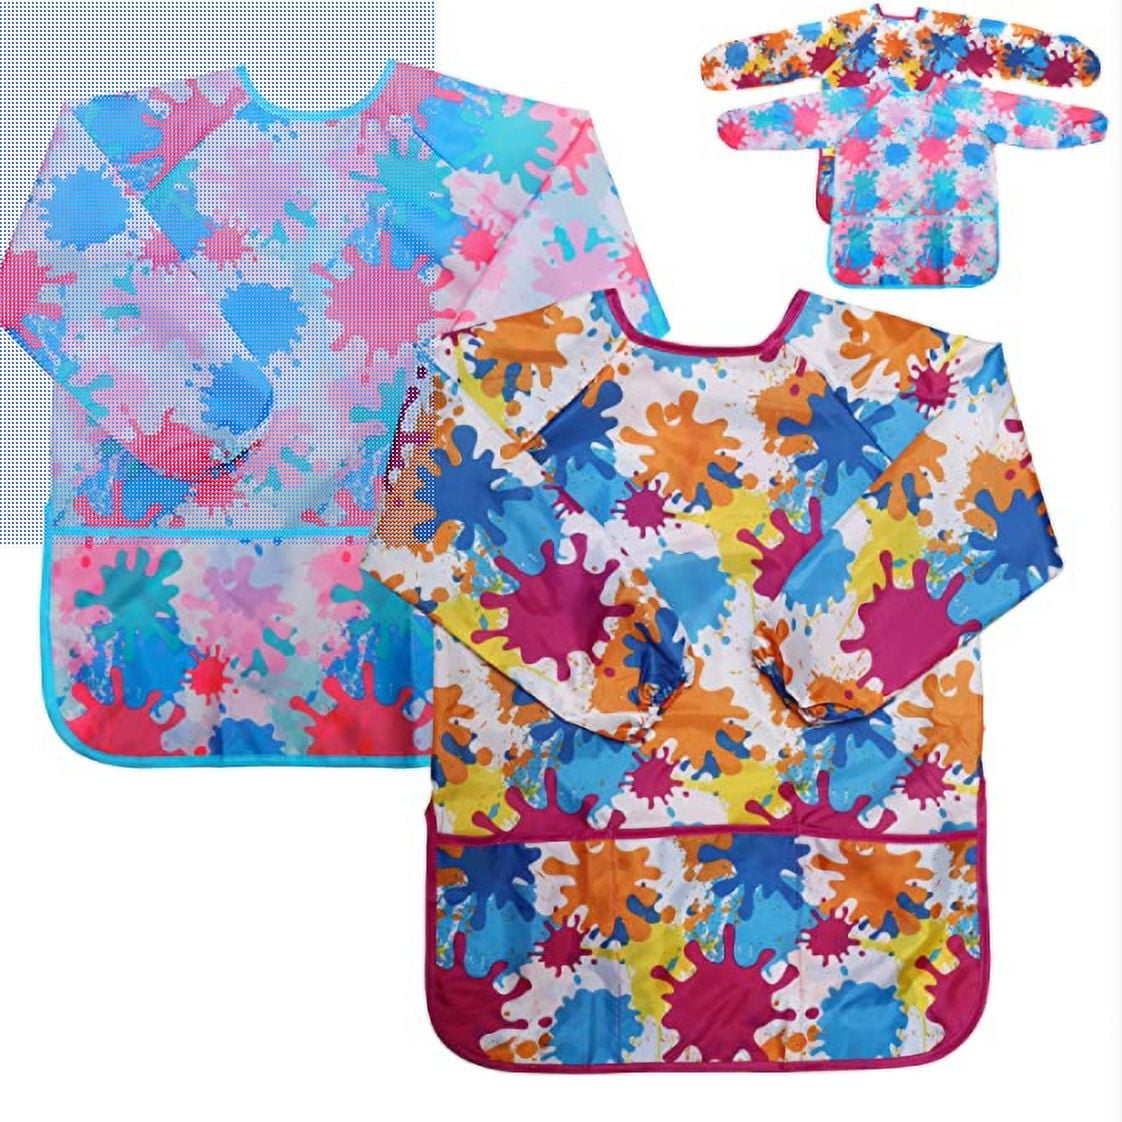 2 Pack Kids Art Smock Toddler Children Painting Apron, Waterproof Play Apron  Long Sleeves With 3 Roomy Pockets For Painting, Craft, Water Play, Eatin